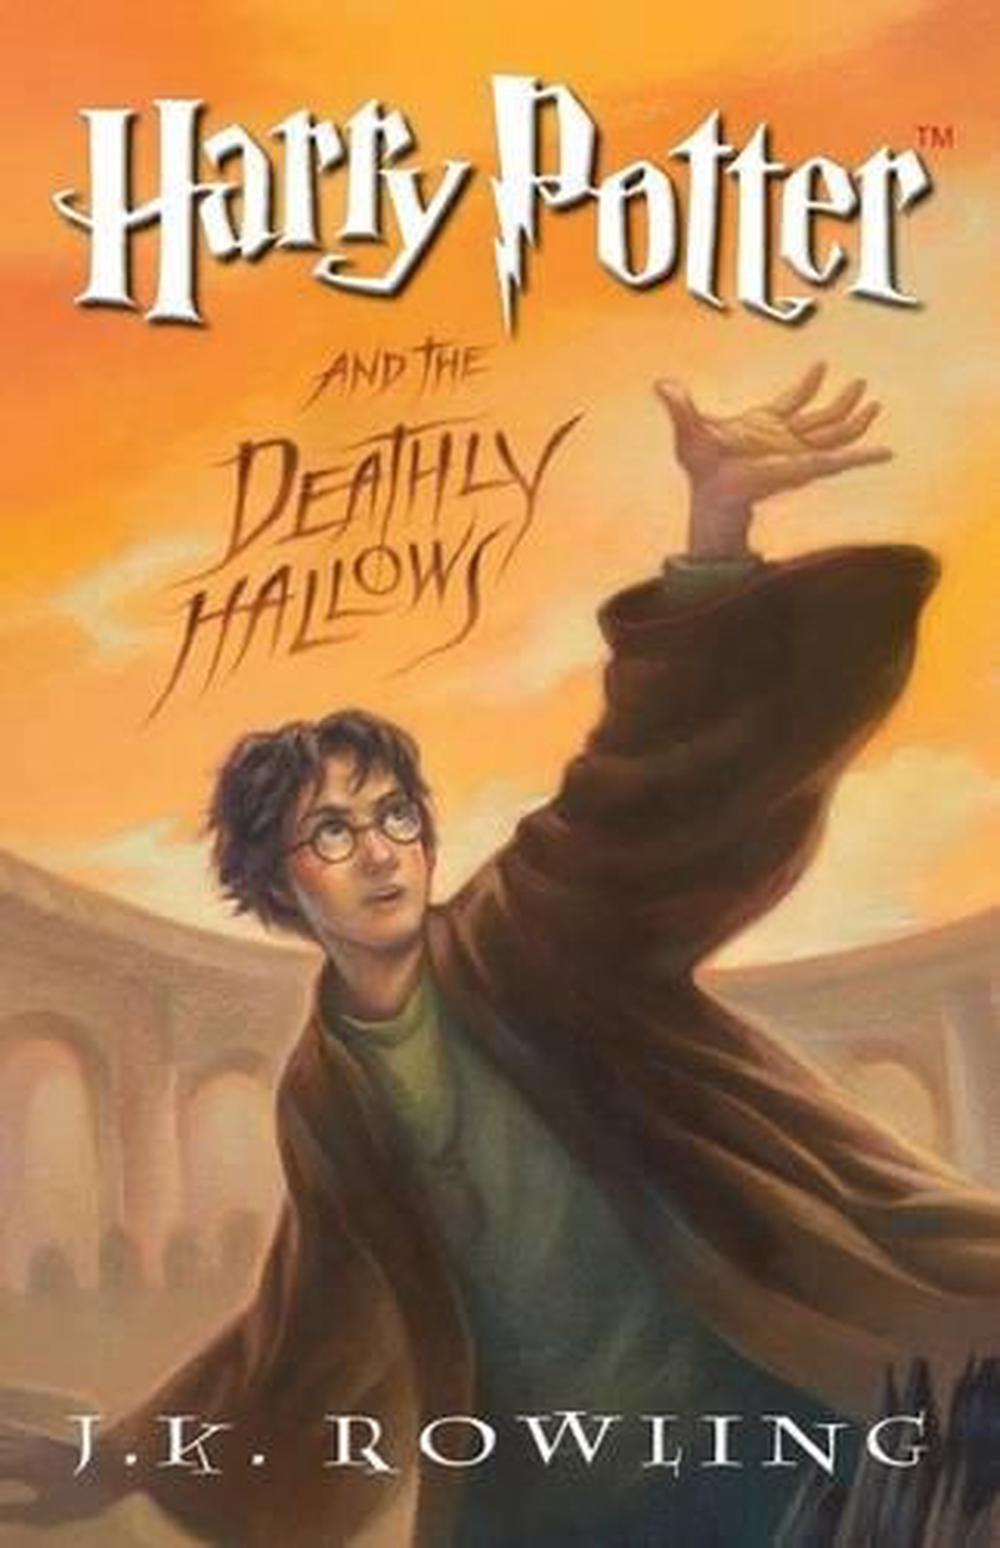 book review of harry potter in english